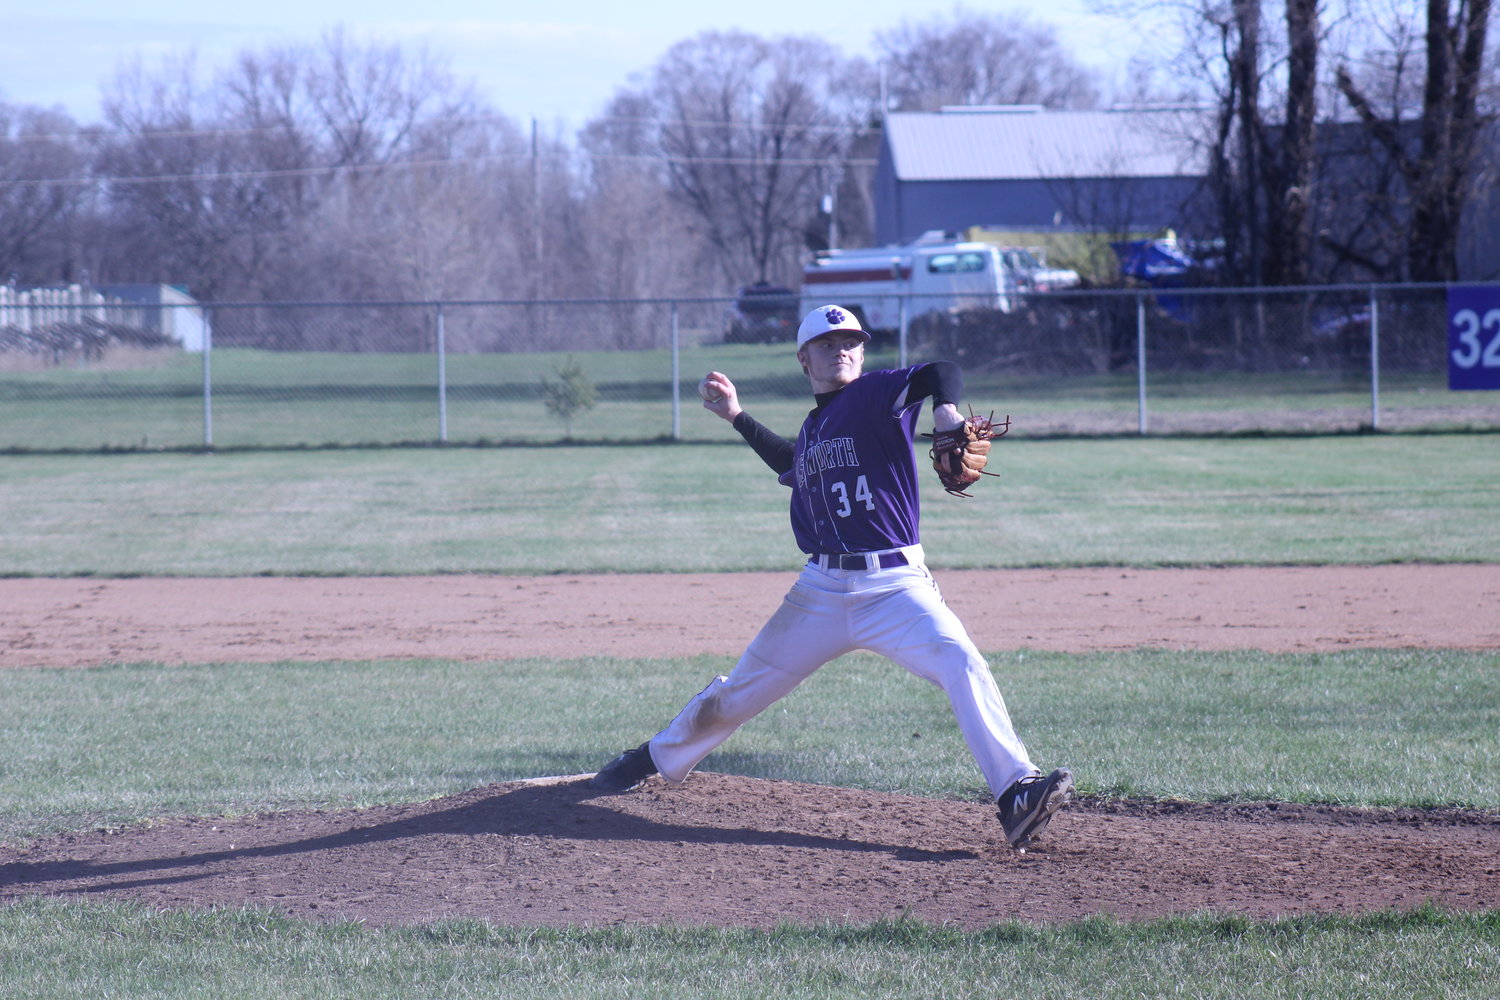 Ellsworth senior Urban Broadway, who graduated last year, pitches during a game last spring. Broadway was a three-year starter and left a gap in the Panthers’ pitching rotation heading into the 2023 season.